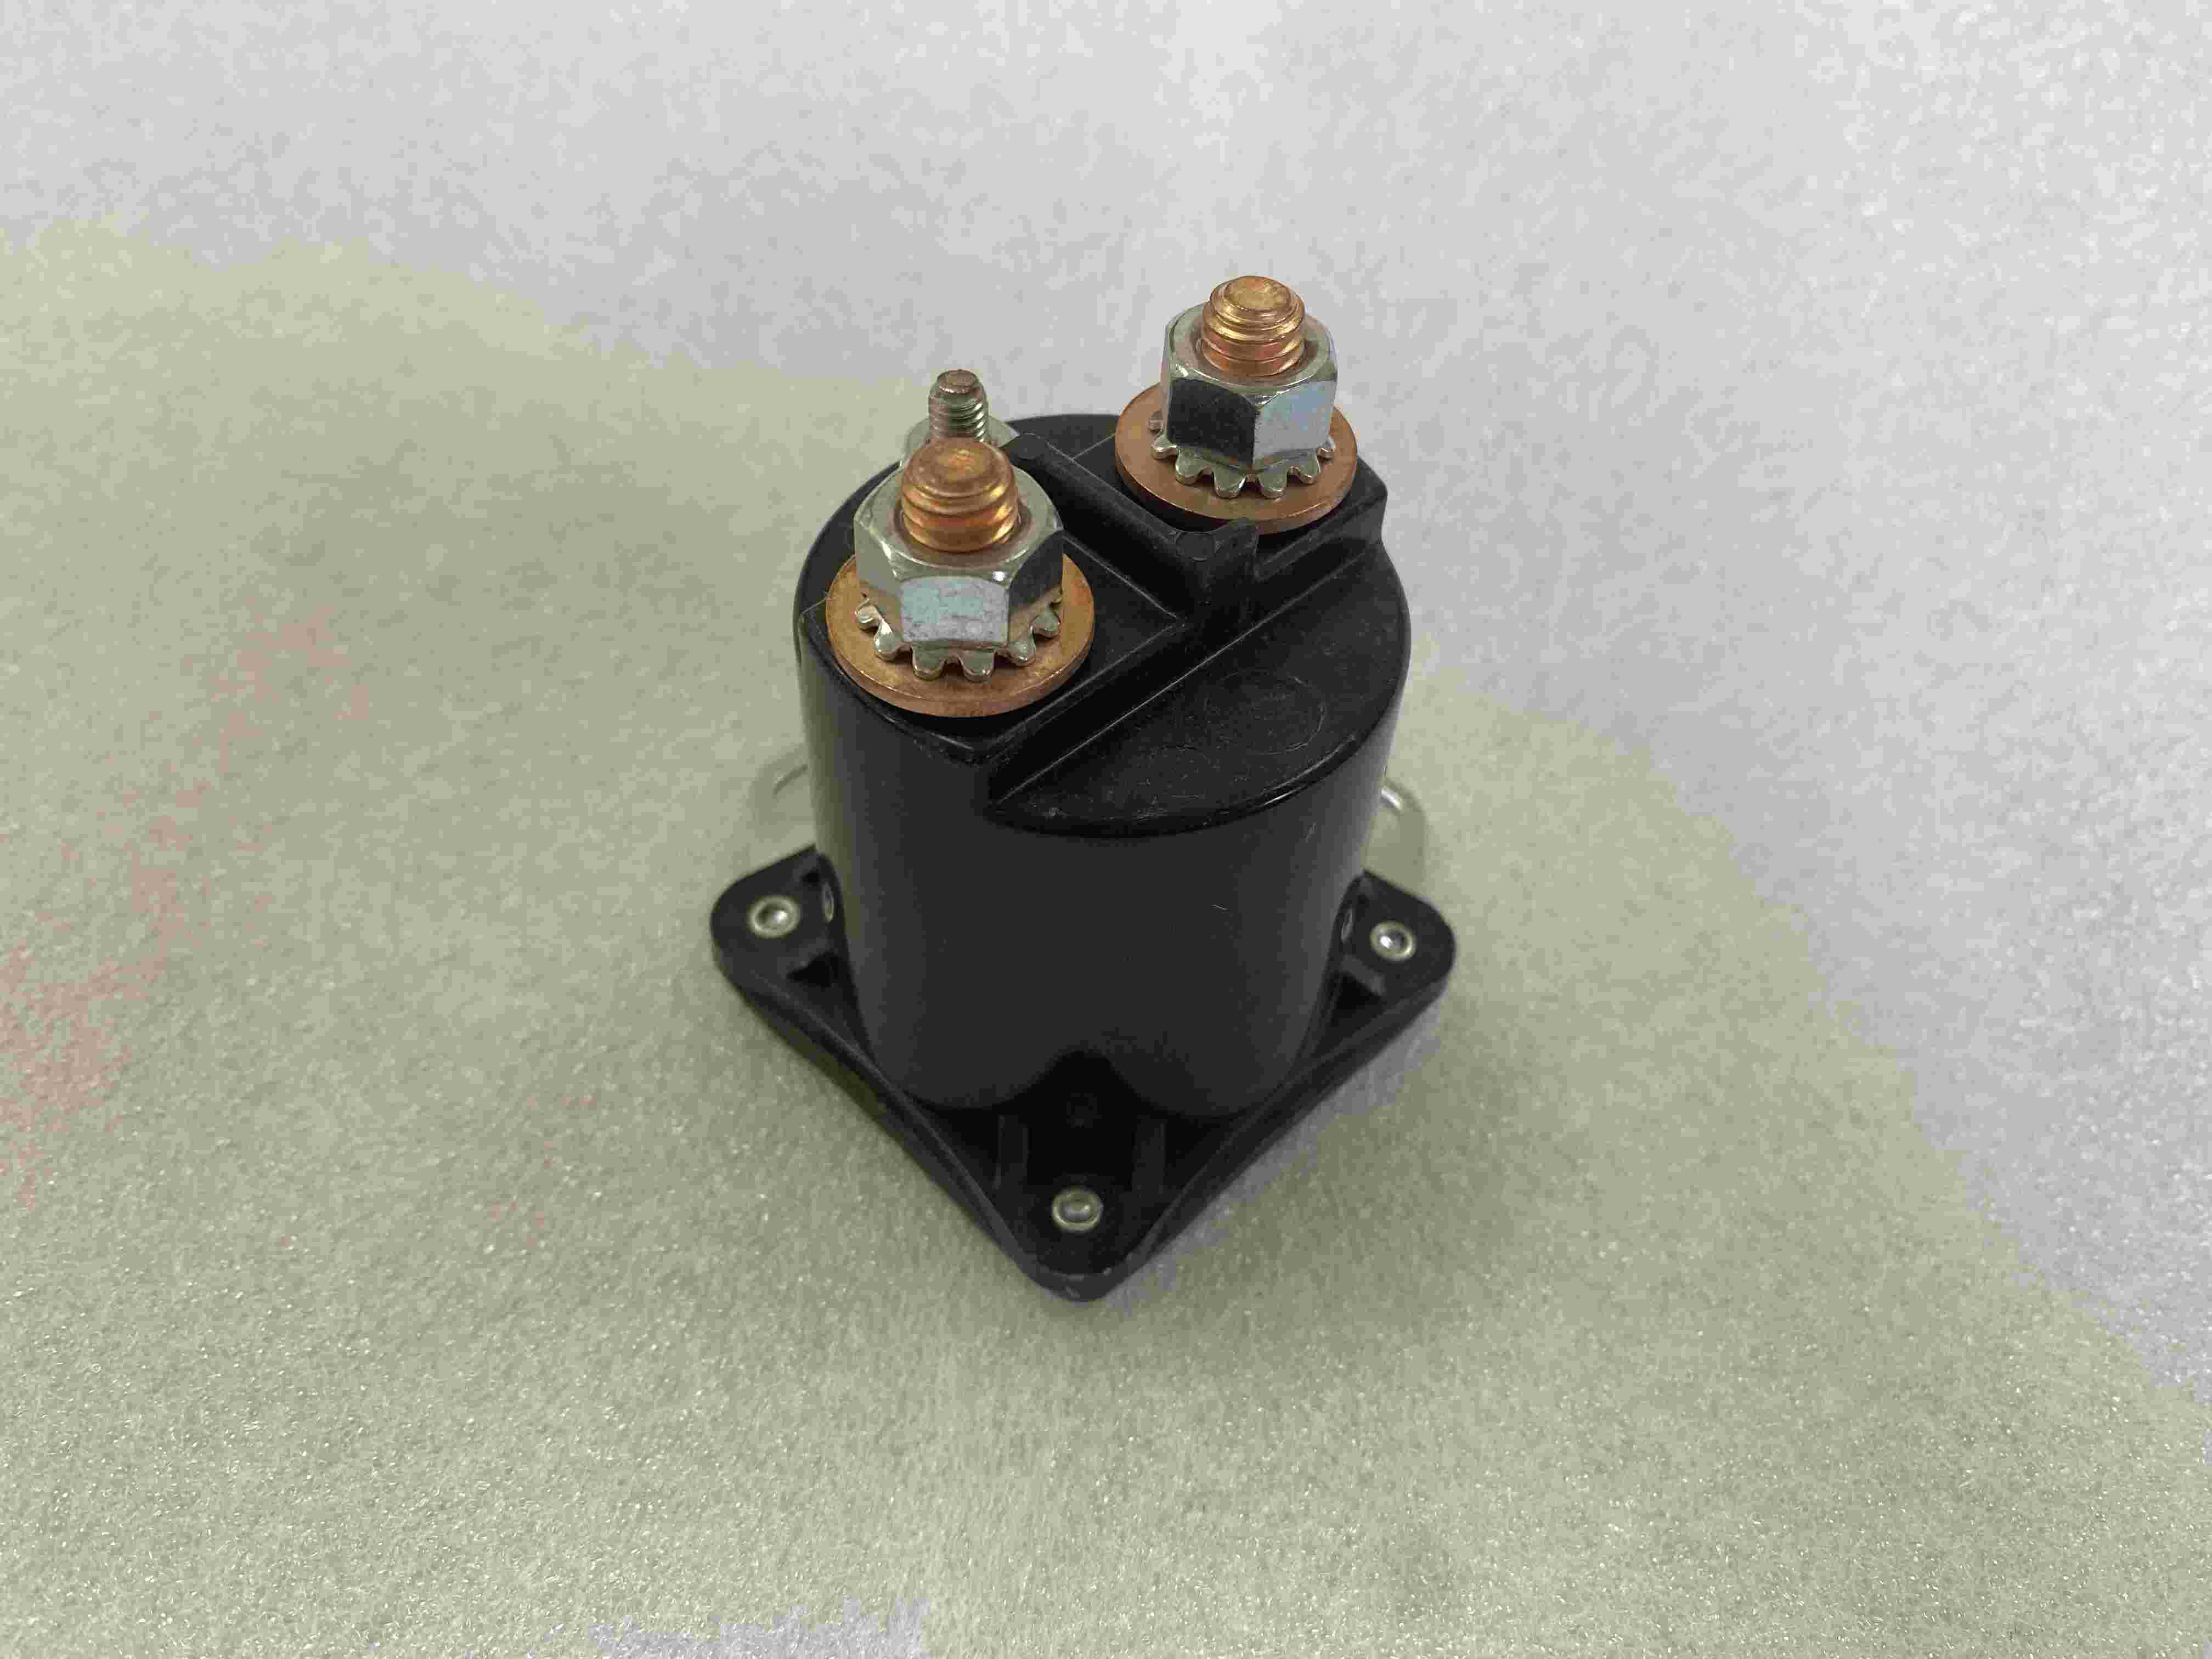 3740113 3740115 3740058 replacement relay switch fitting for JLG